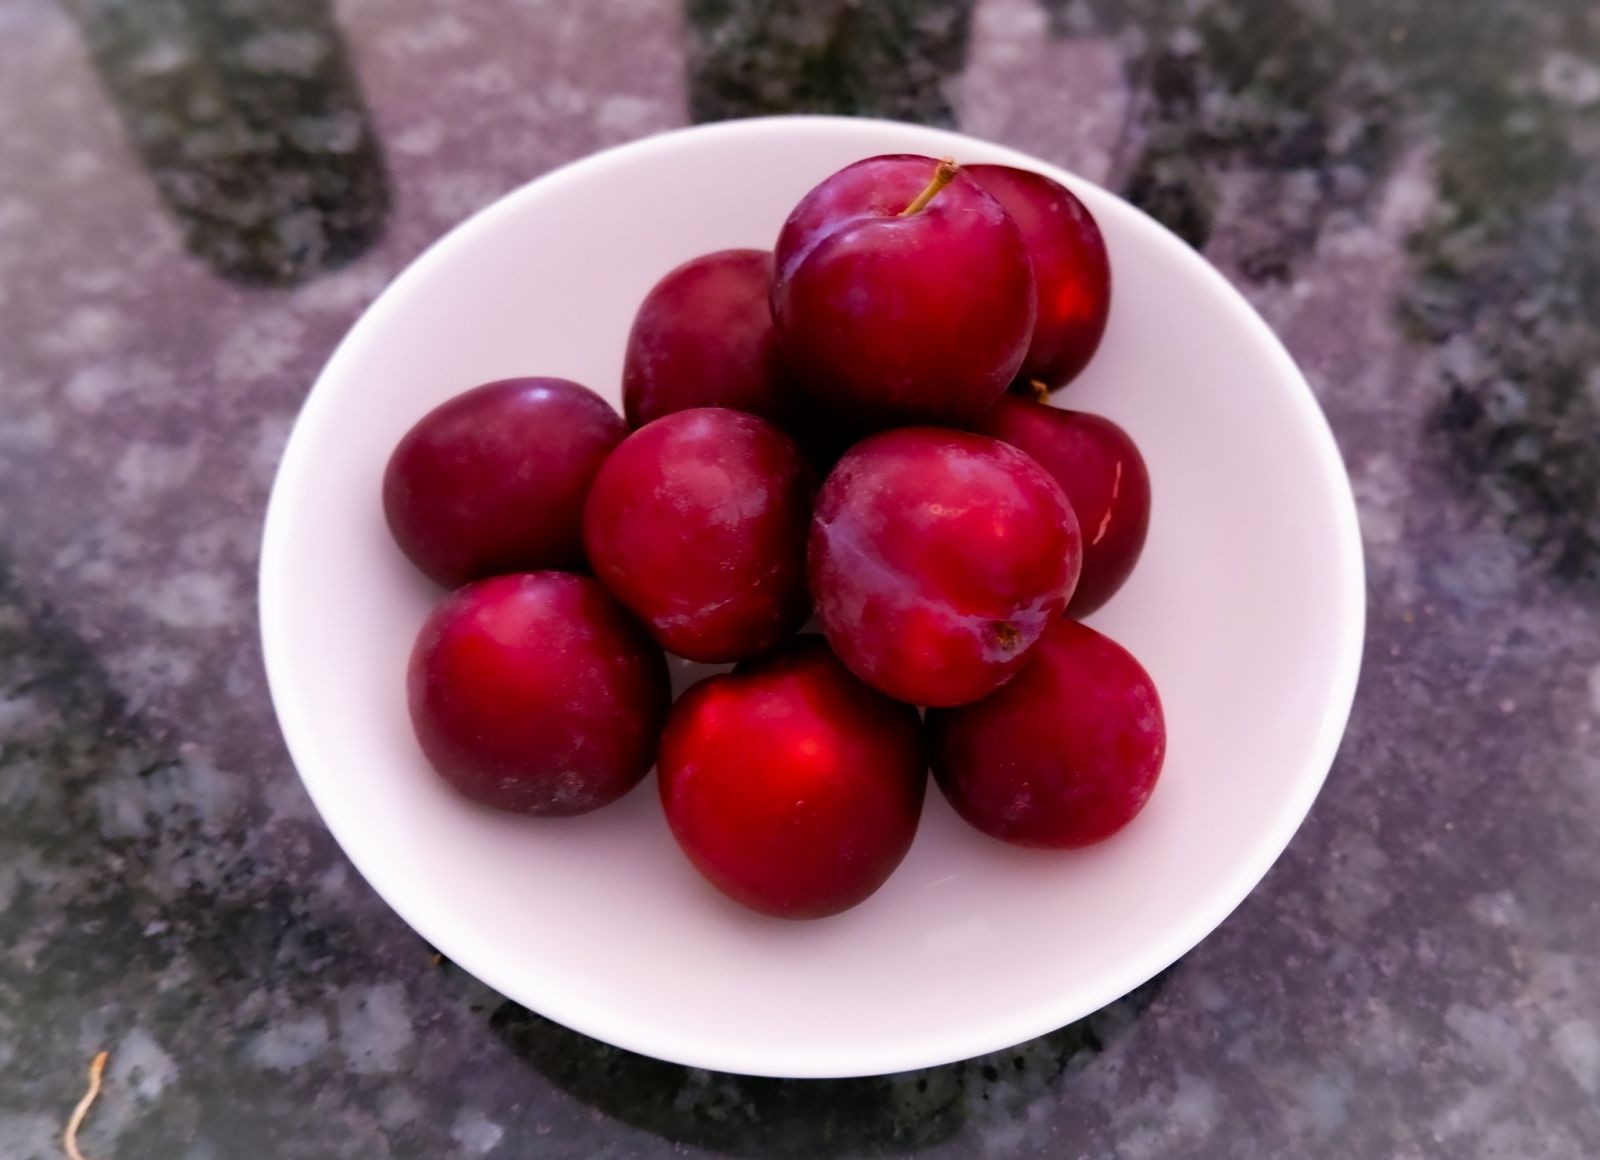 Plums in a bowl